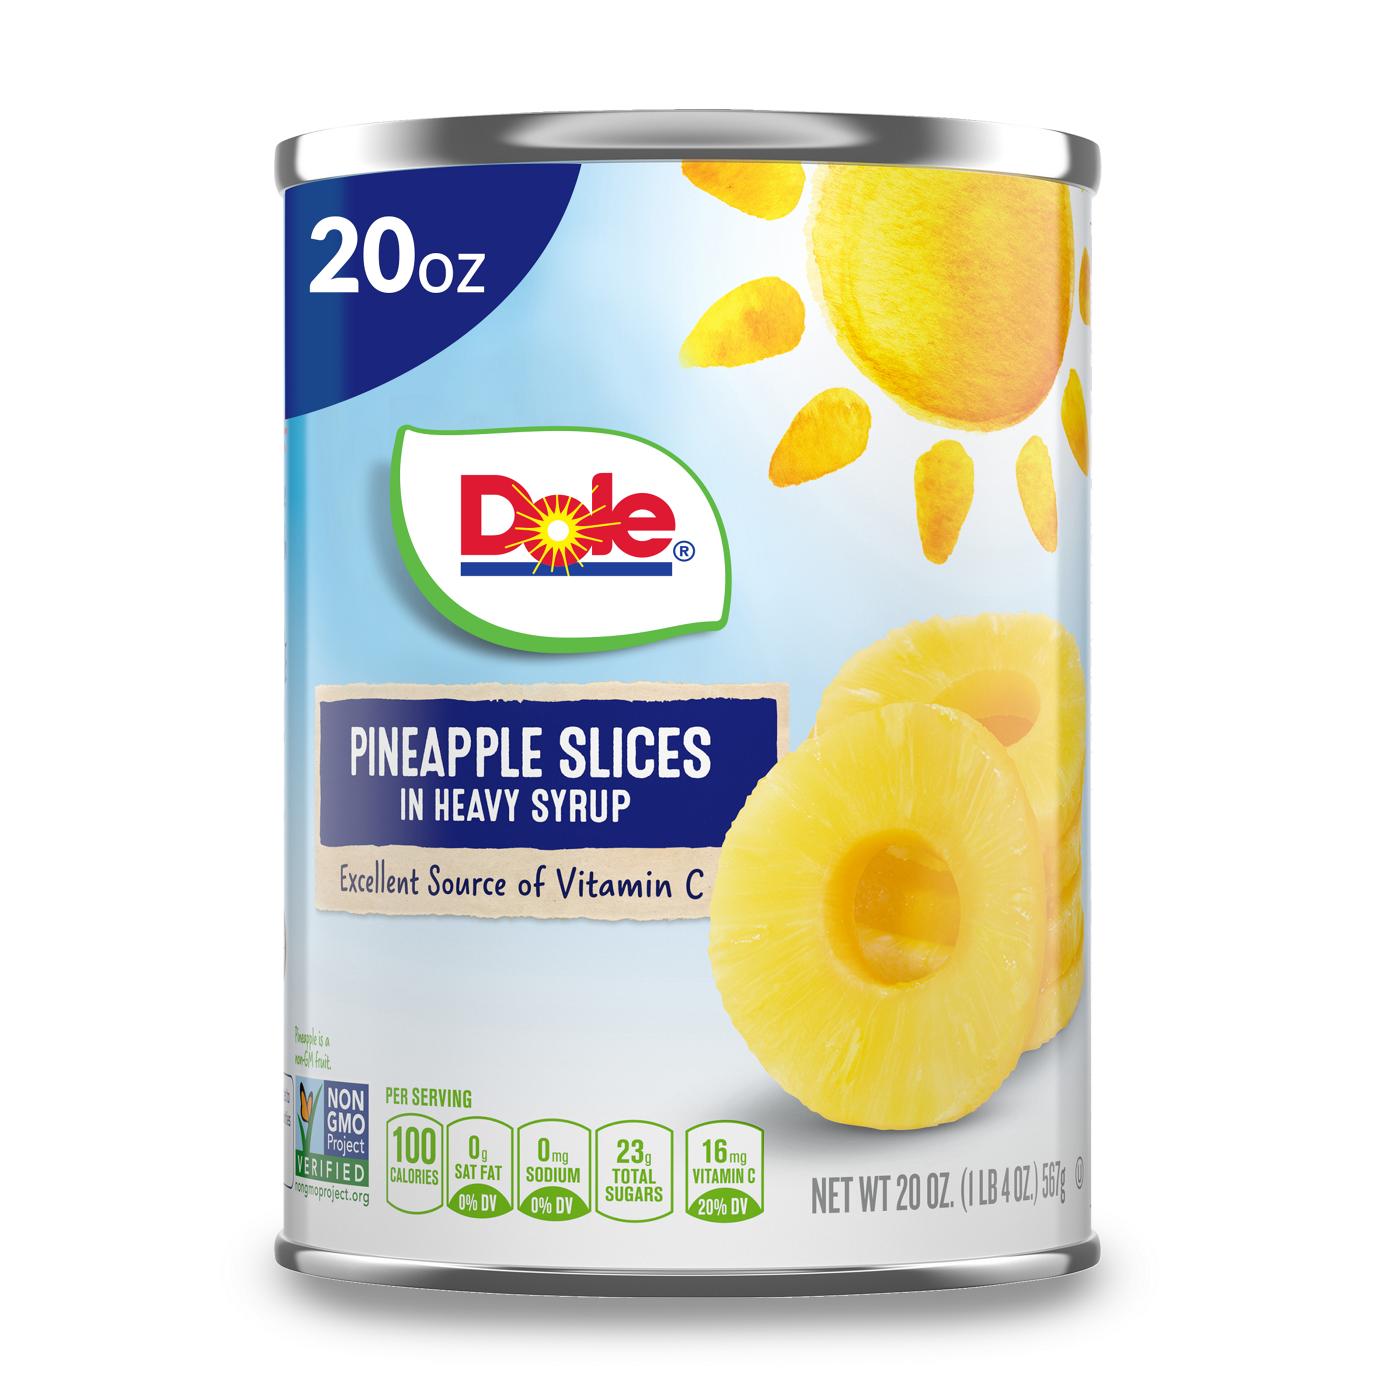 Dole Pineapple Slices in Heavy Syrup; image 1 of 5